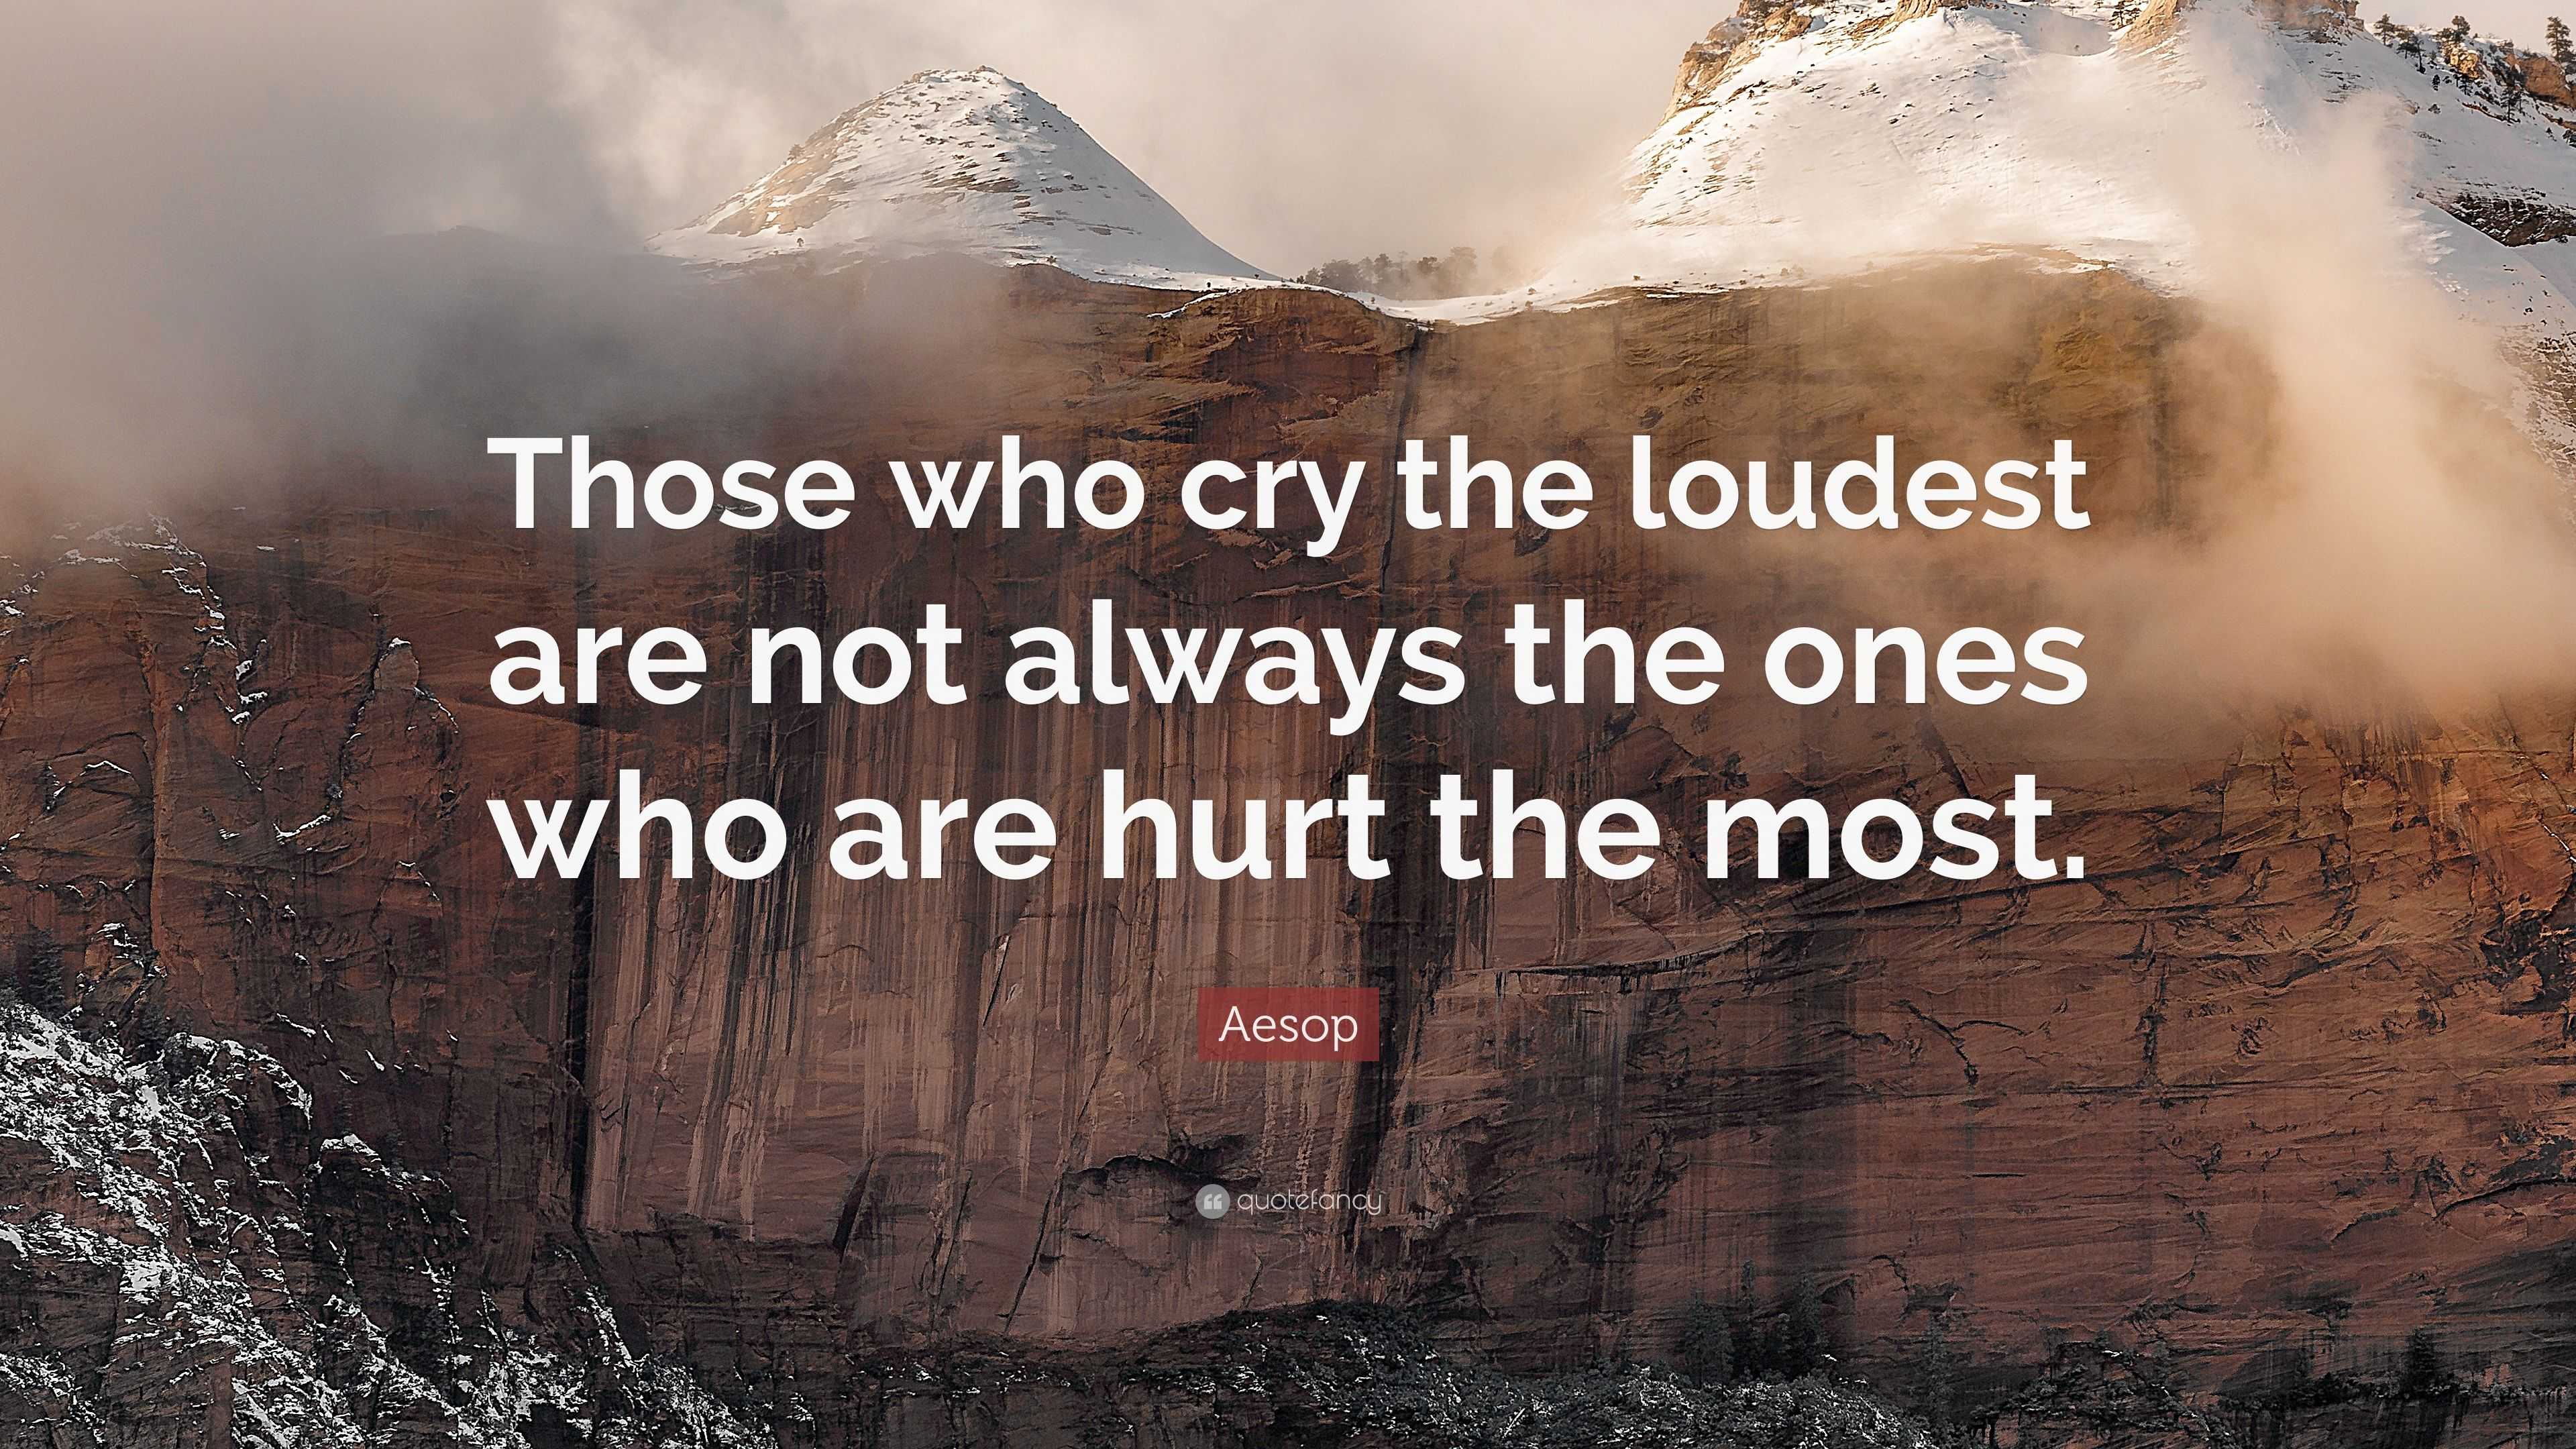 Aesop Quote “Those who cry the loudest are not always the ones who are